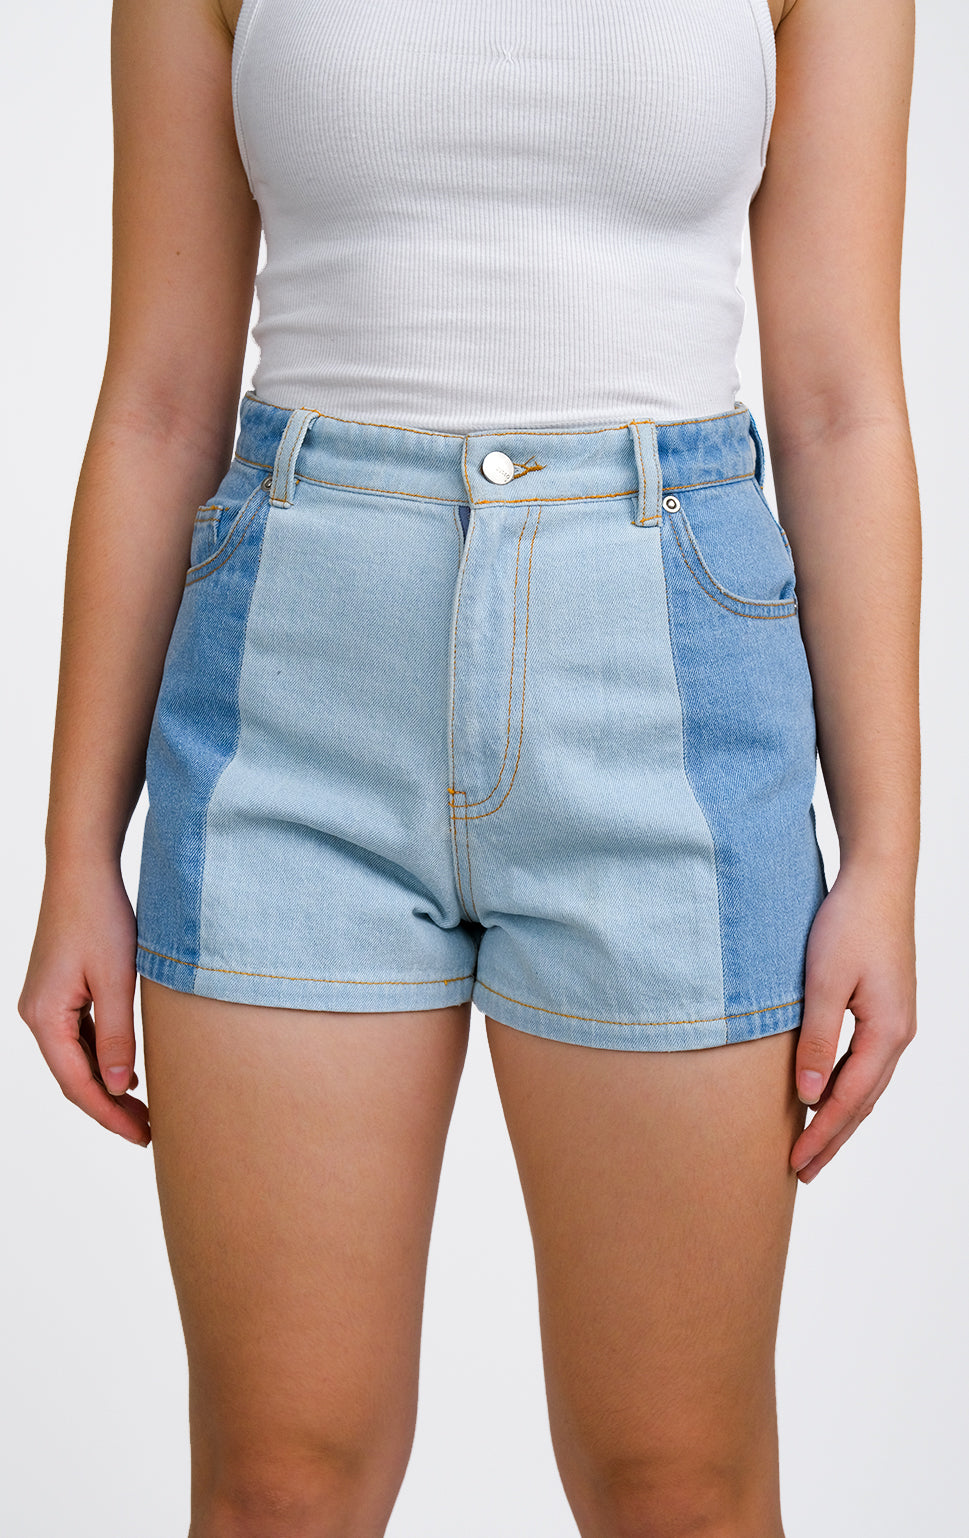 HIGH WAISTED TWO-TONED DENIM SHORTS